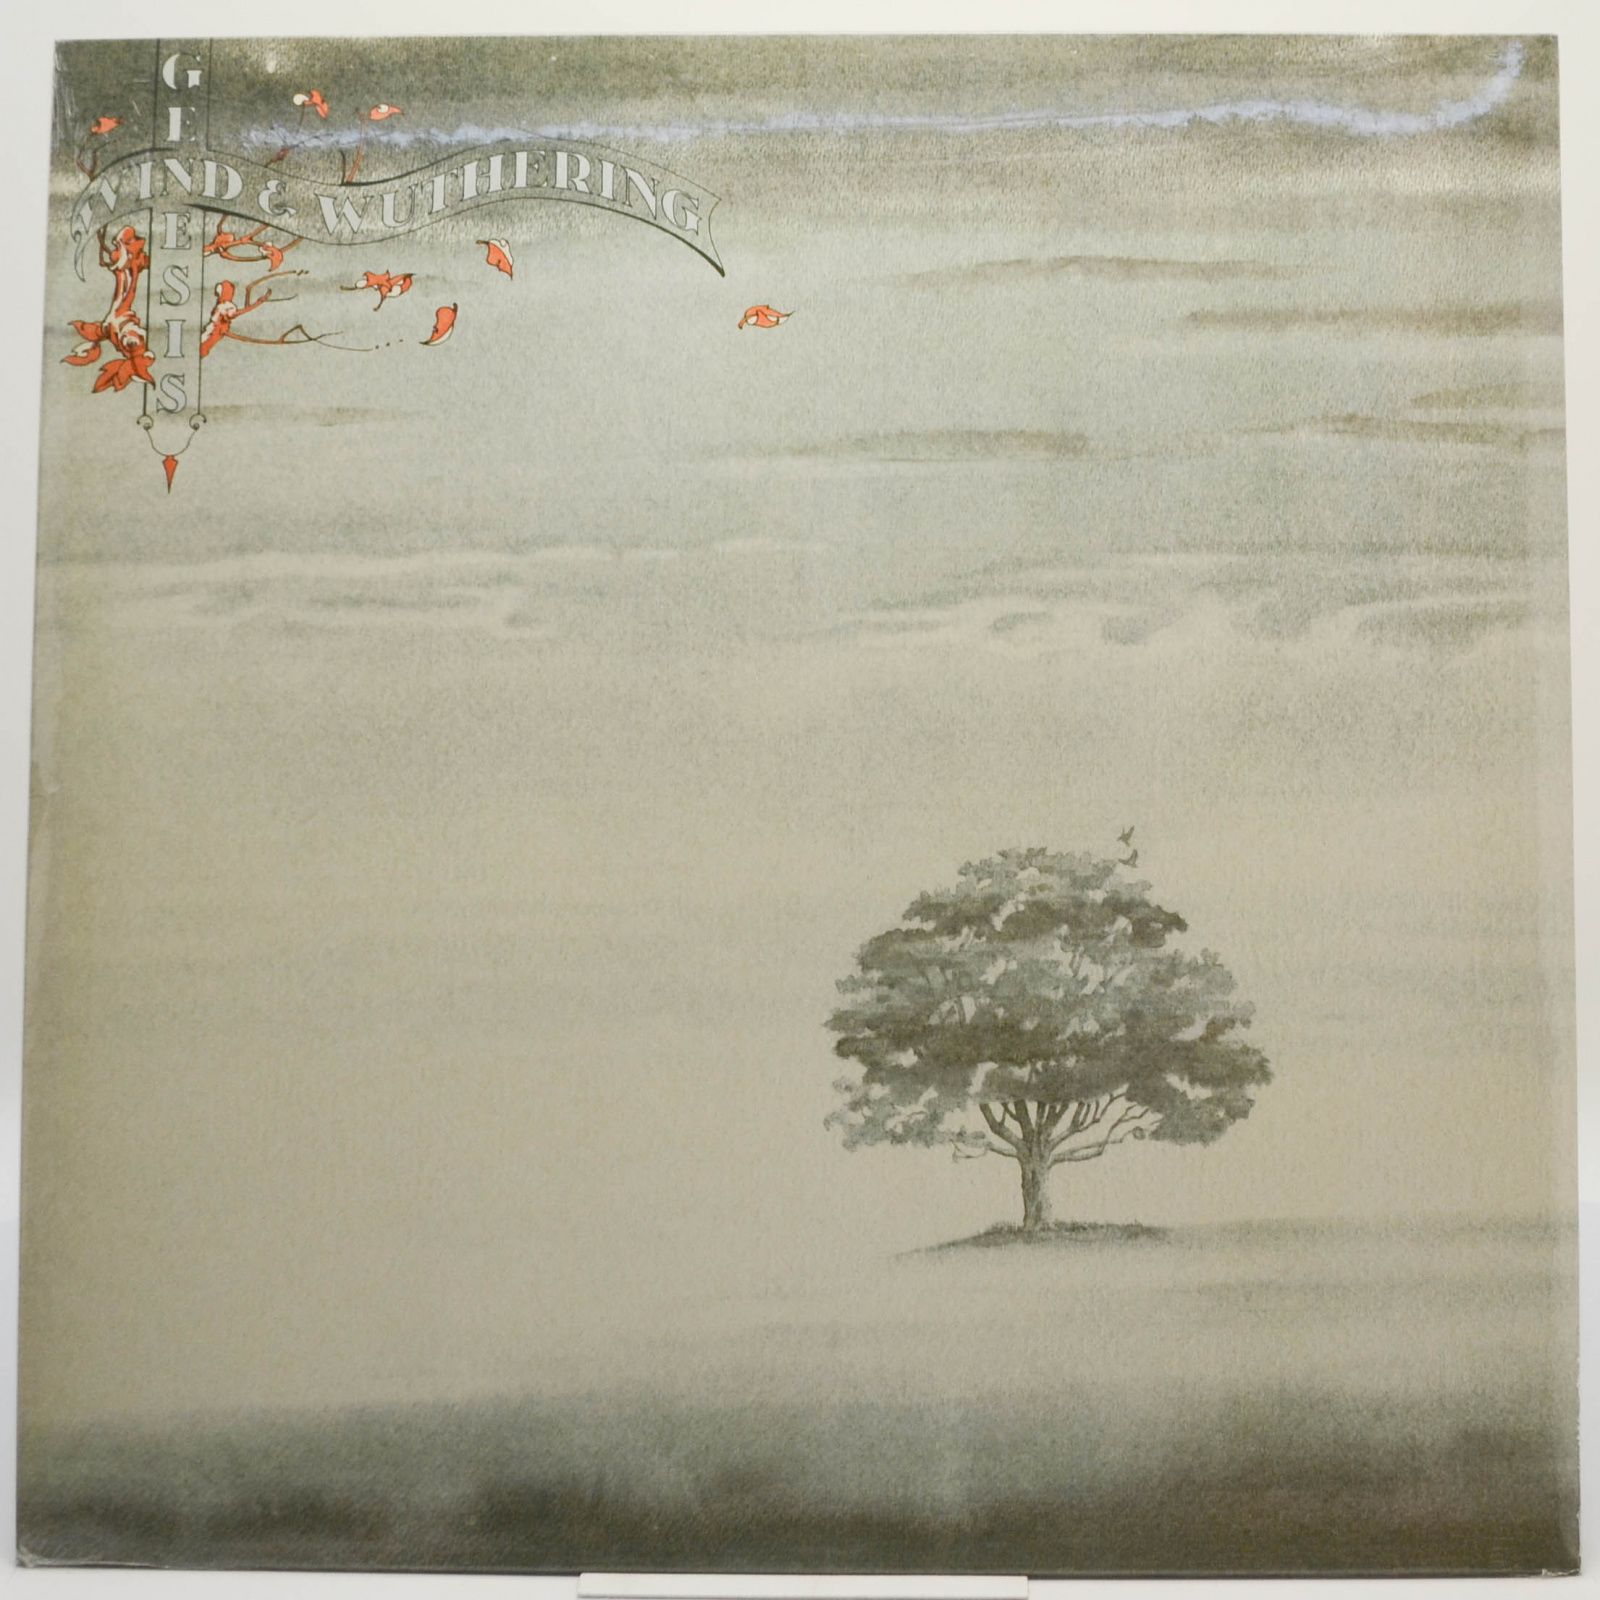 Wind & Wuthering, 1976